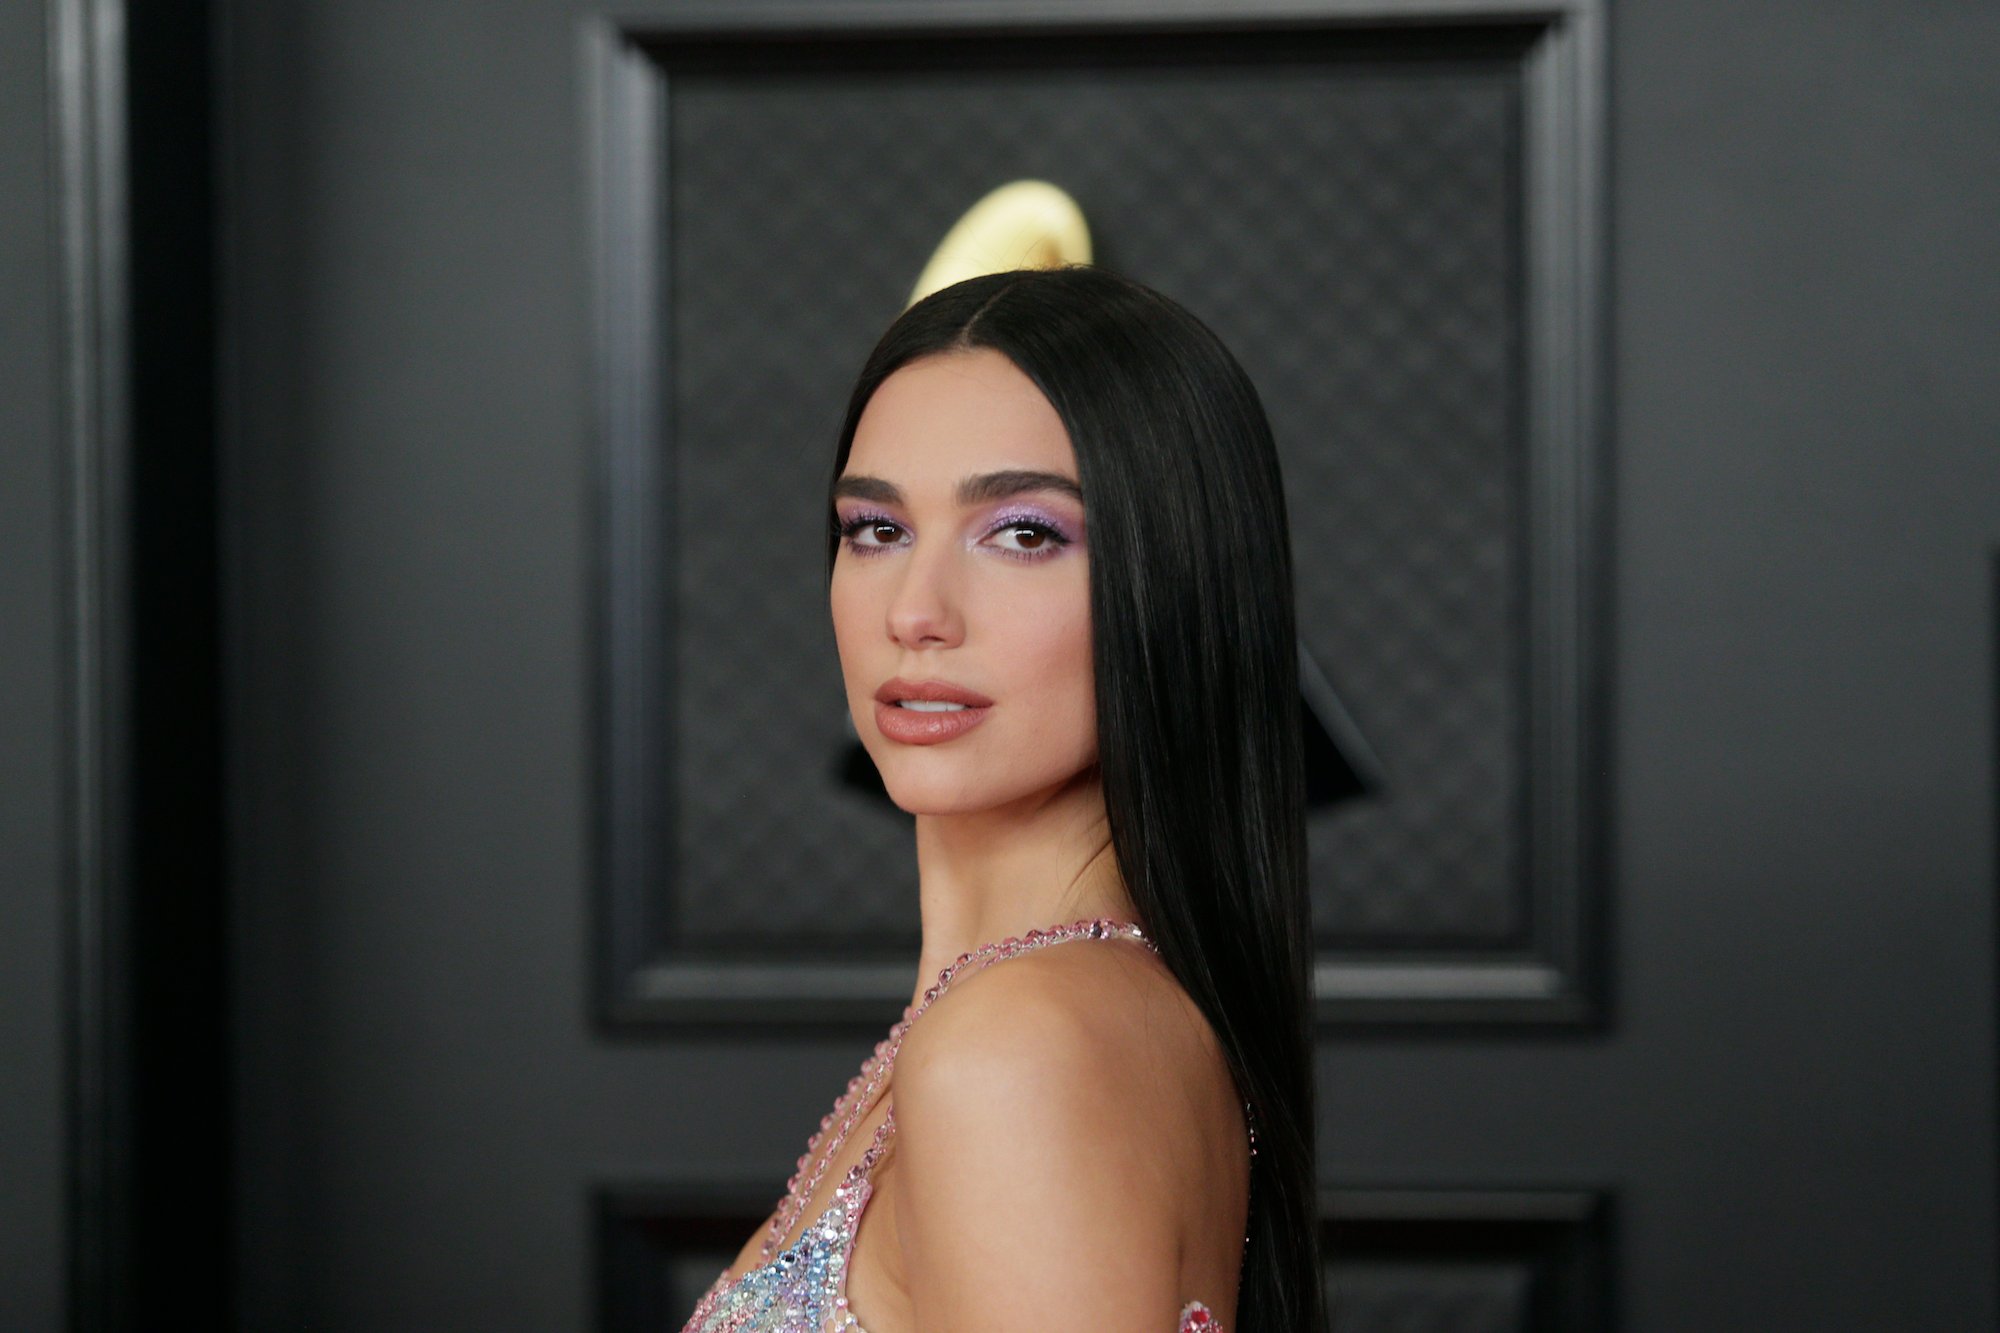 Dua Lipa smiling in front of a black ground